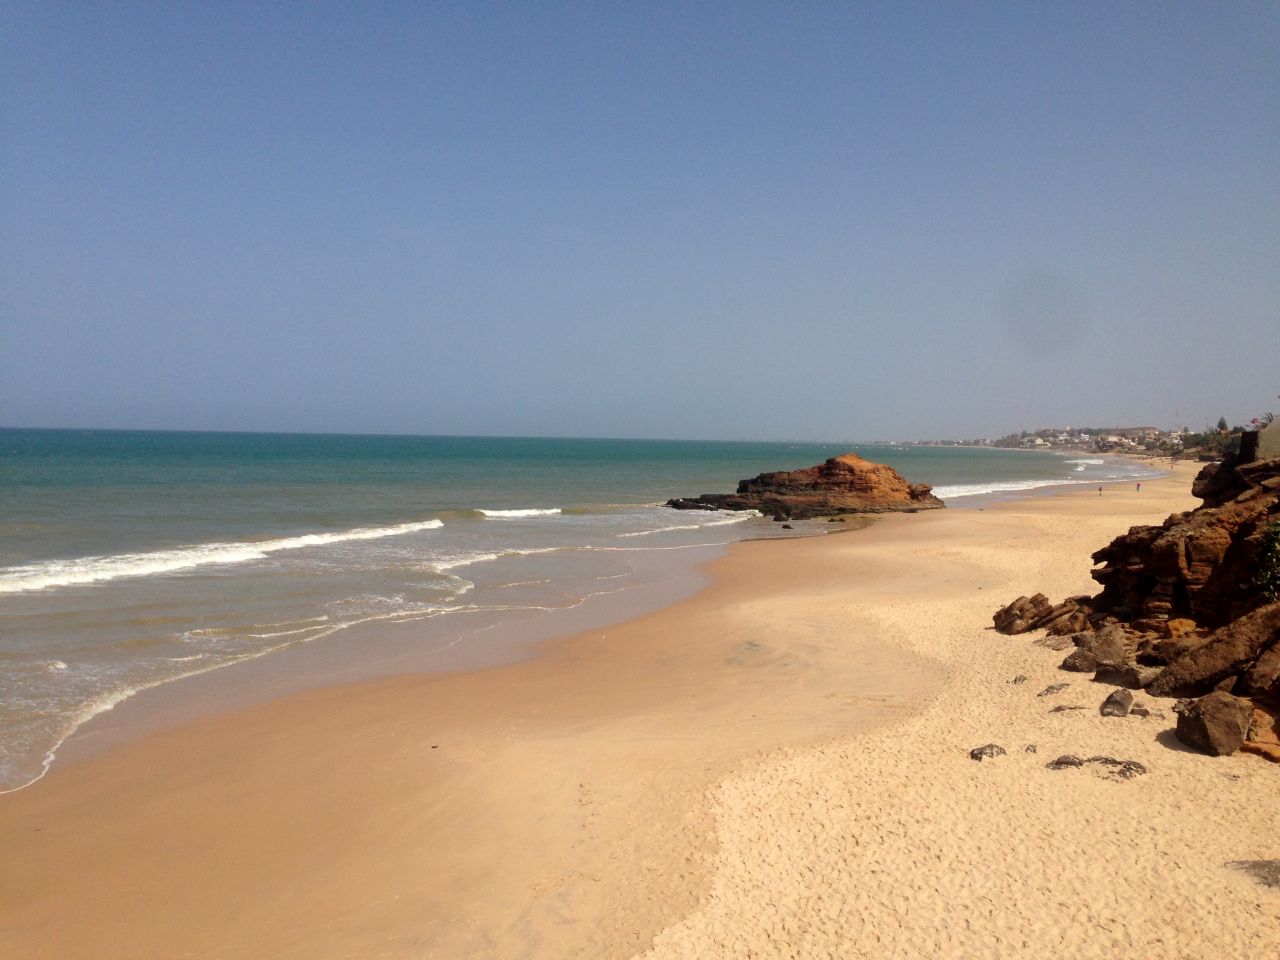 The bohemian village of Toubab Dialaw, just an hour south of Dakar, has a pristine beach and a lively arts scene.